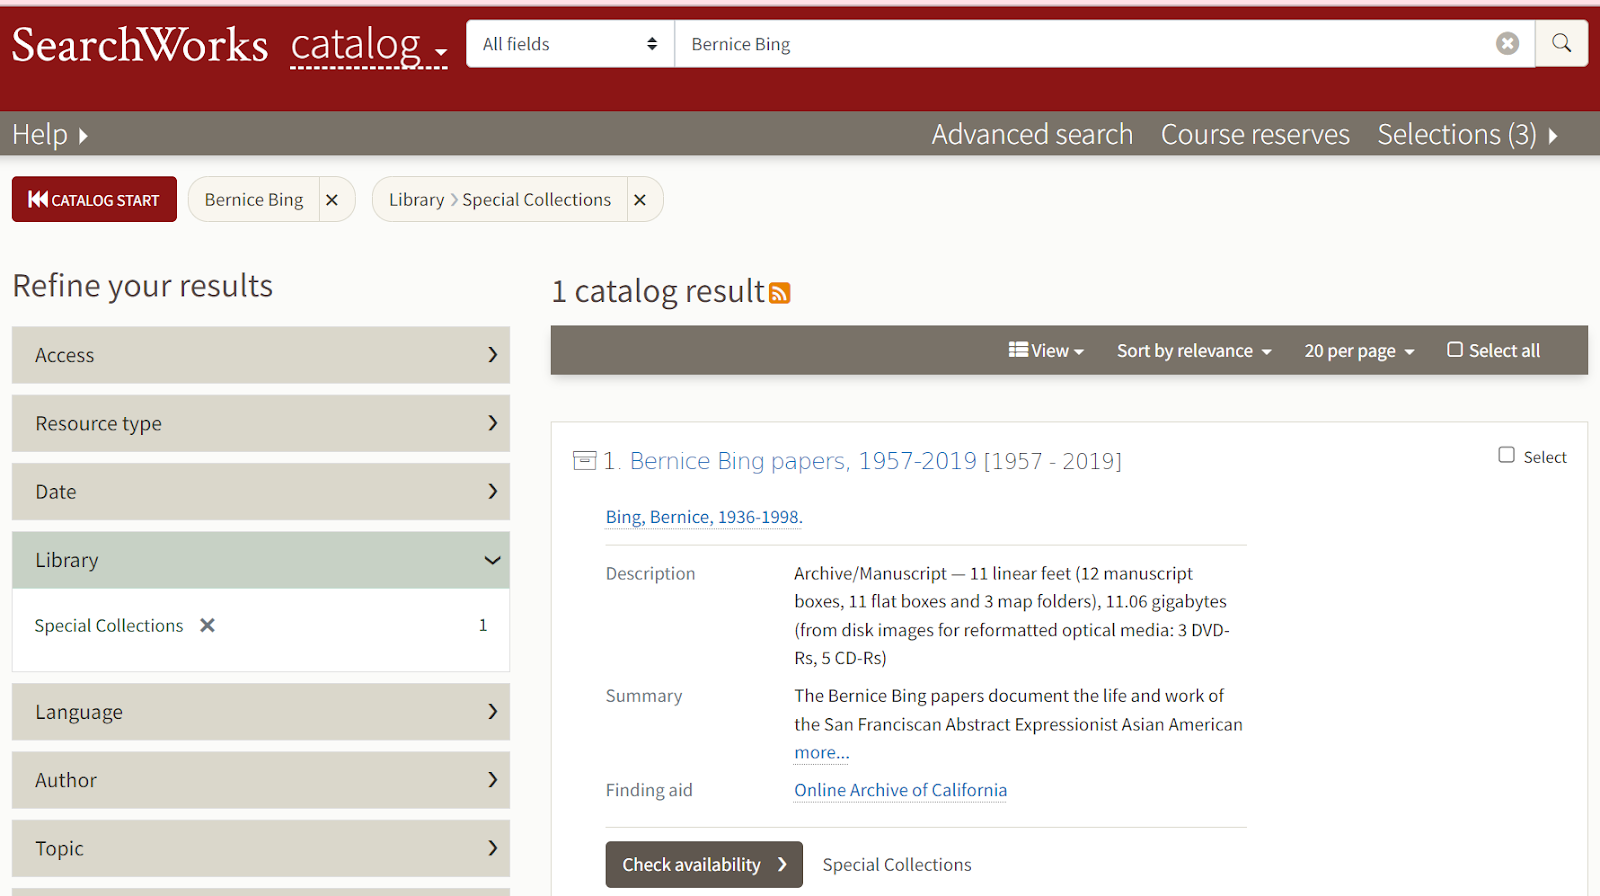 Searchworks catalog results page for search term "Bernice Bing".